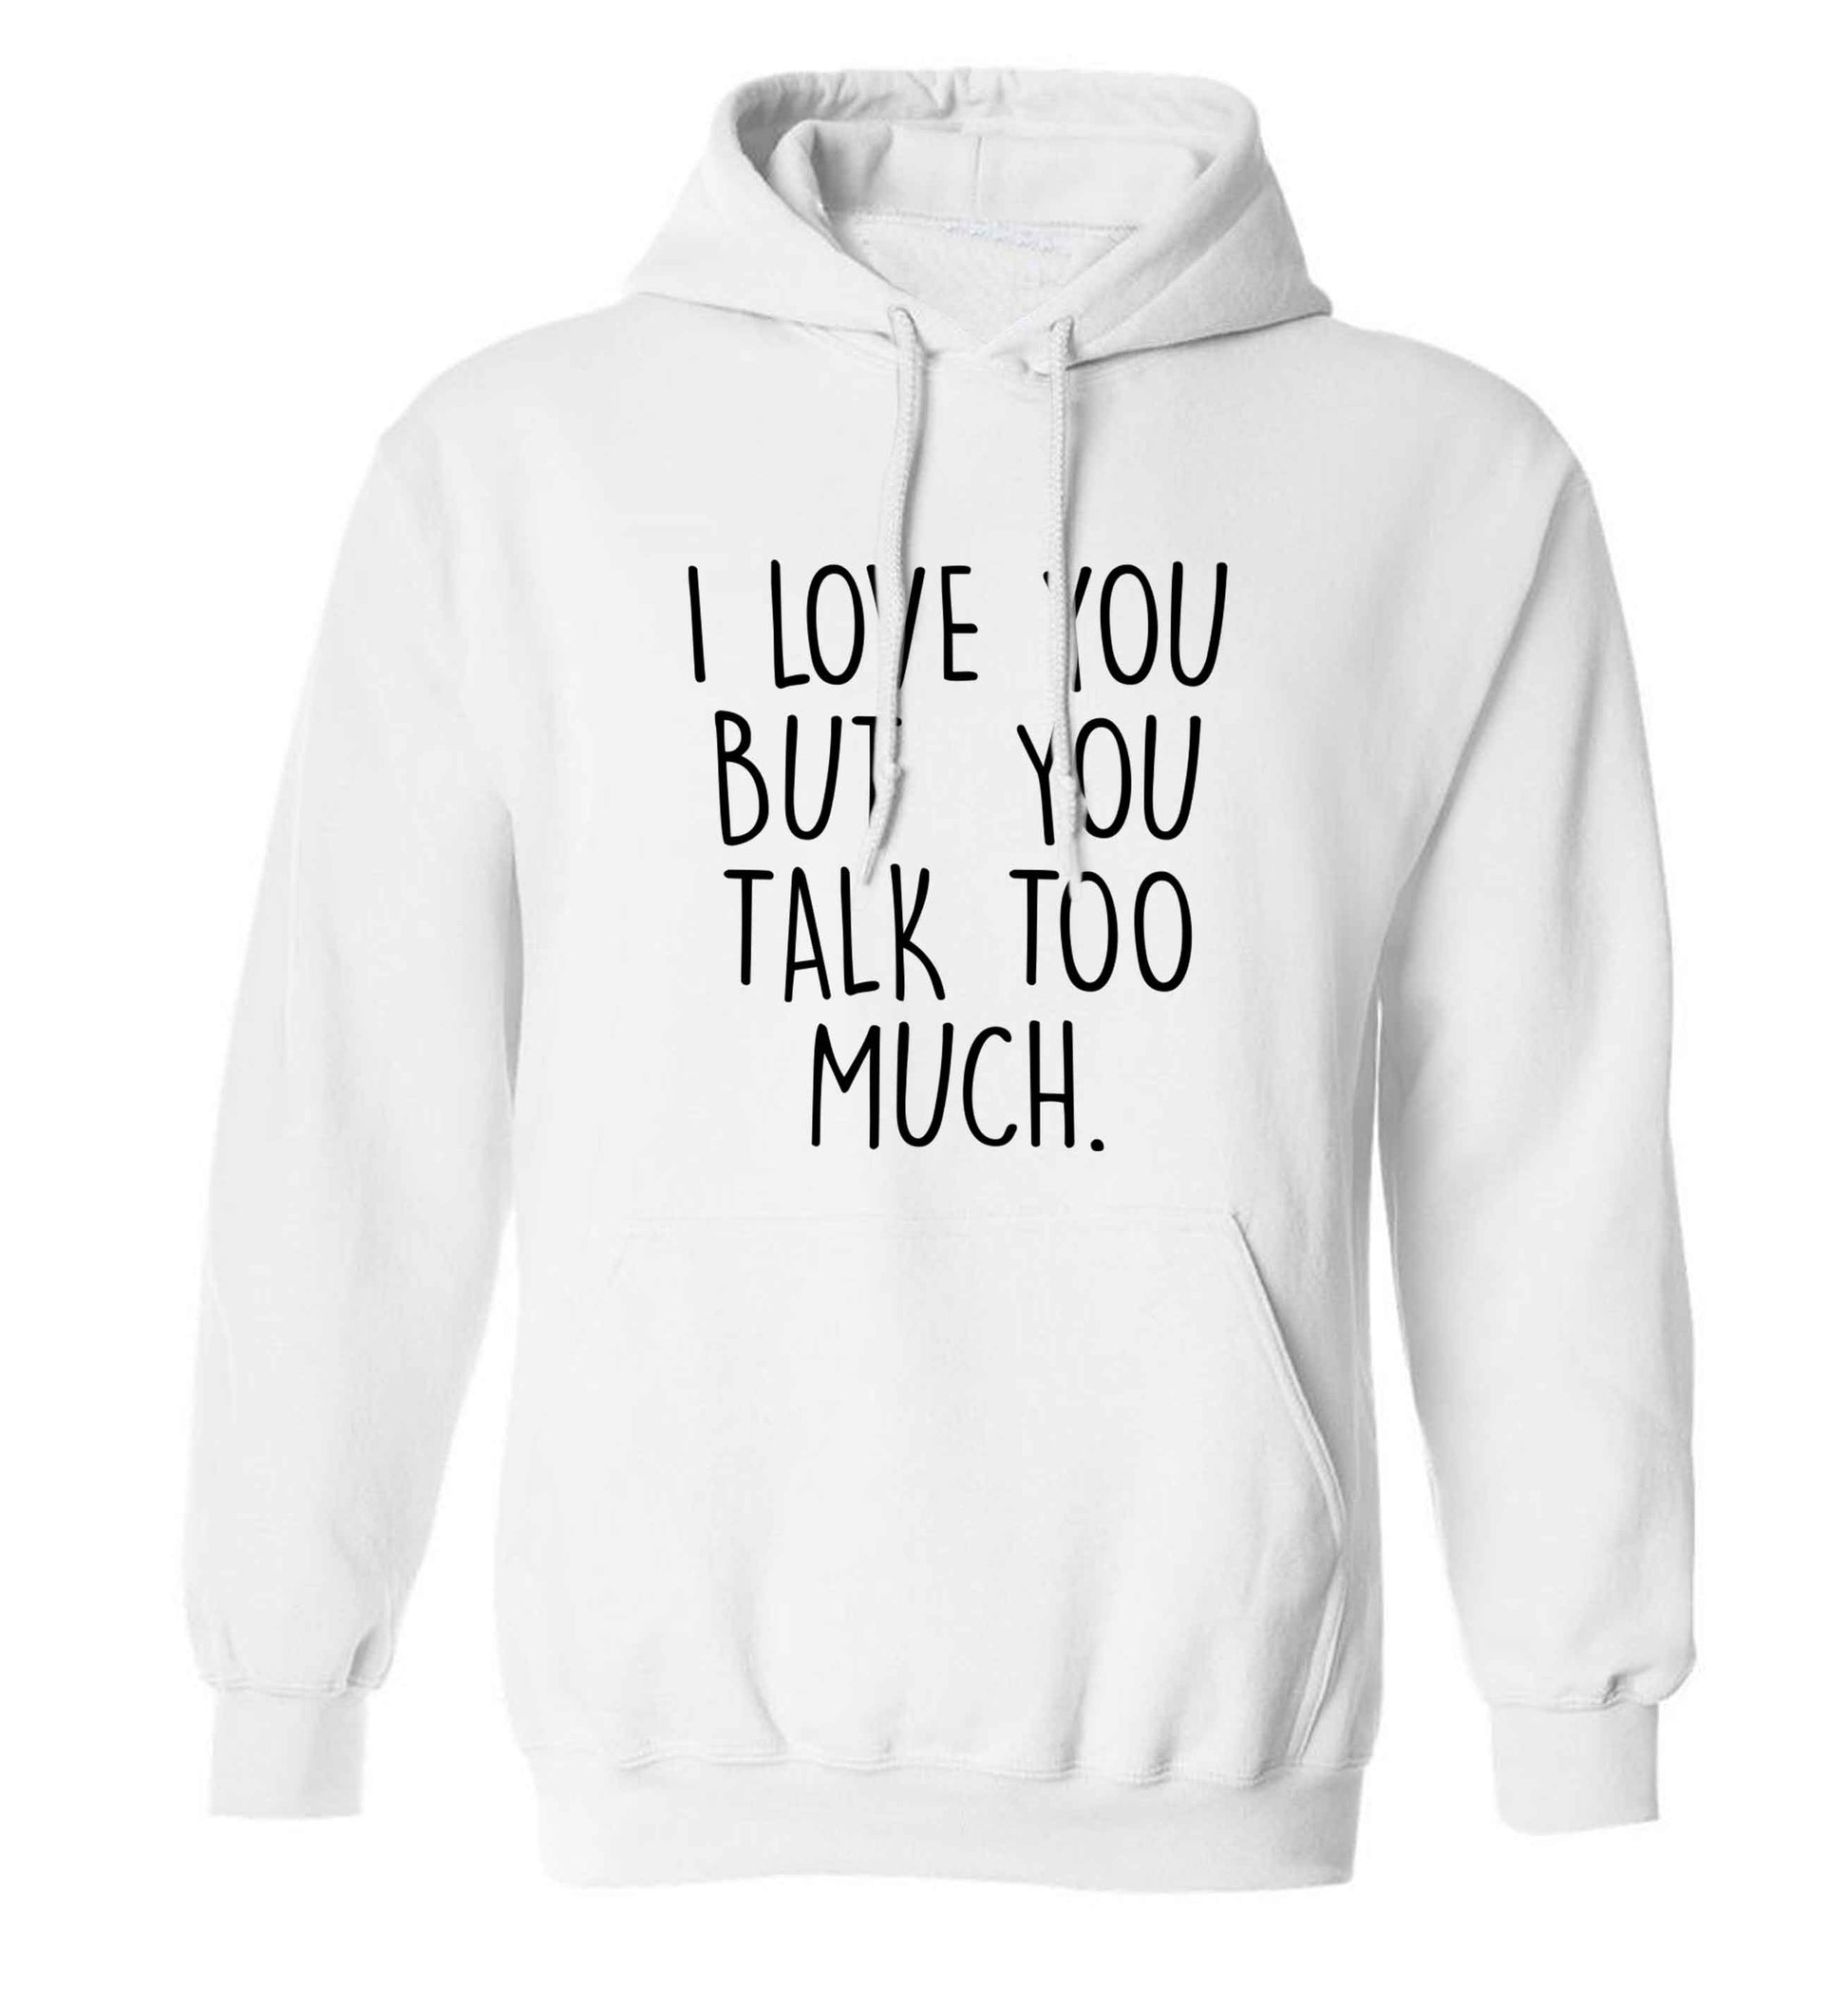 I love you but you talk too much adults unisex white hoodie 2XL